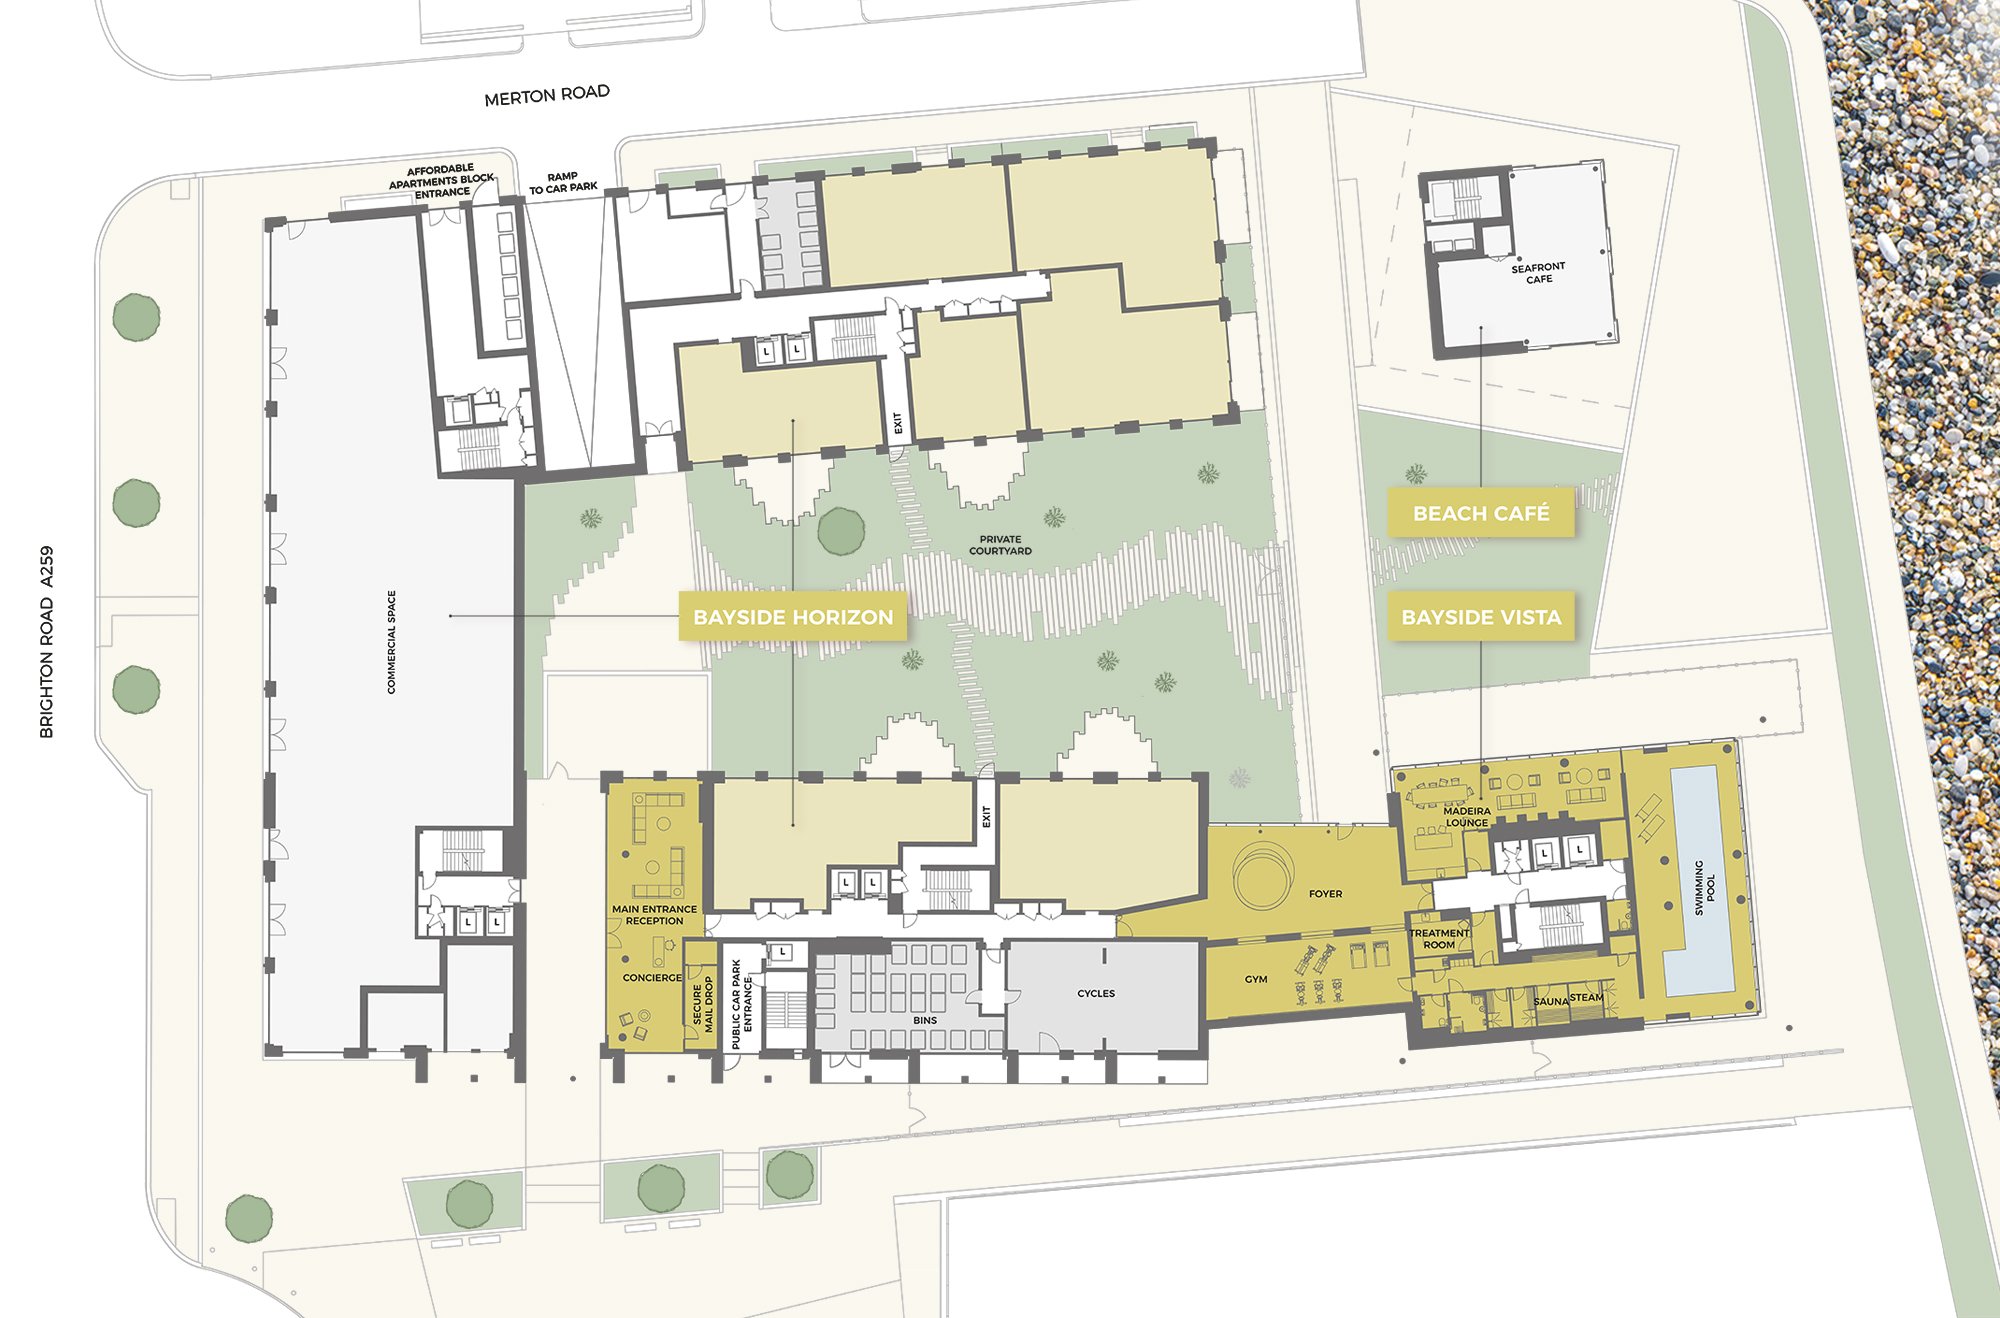 Site plan of the Bayside Apartments development in Worthing